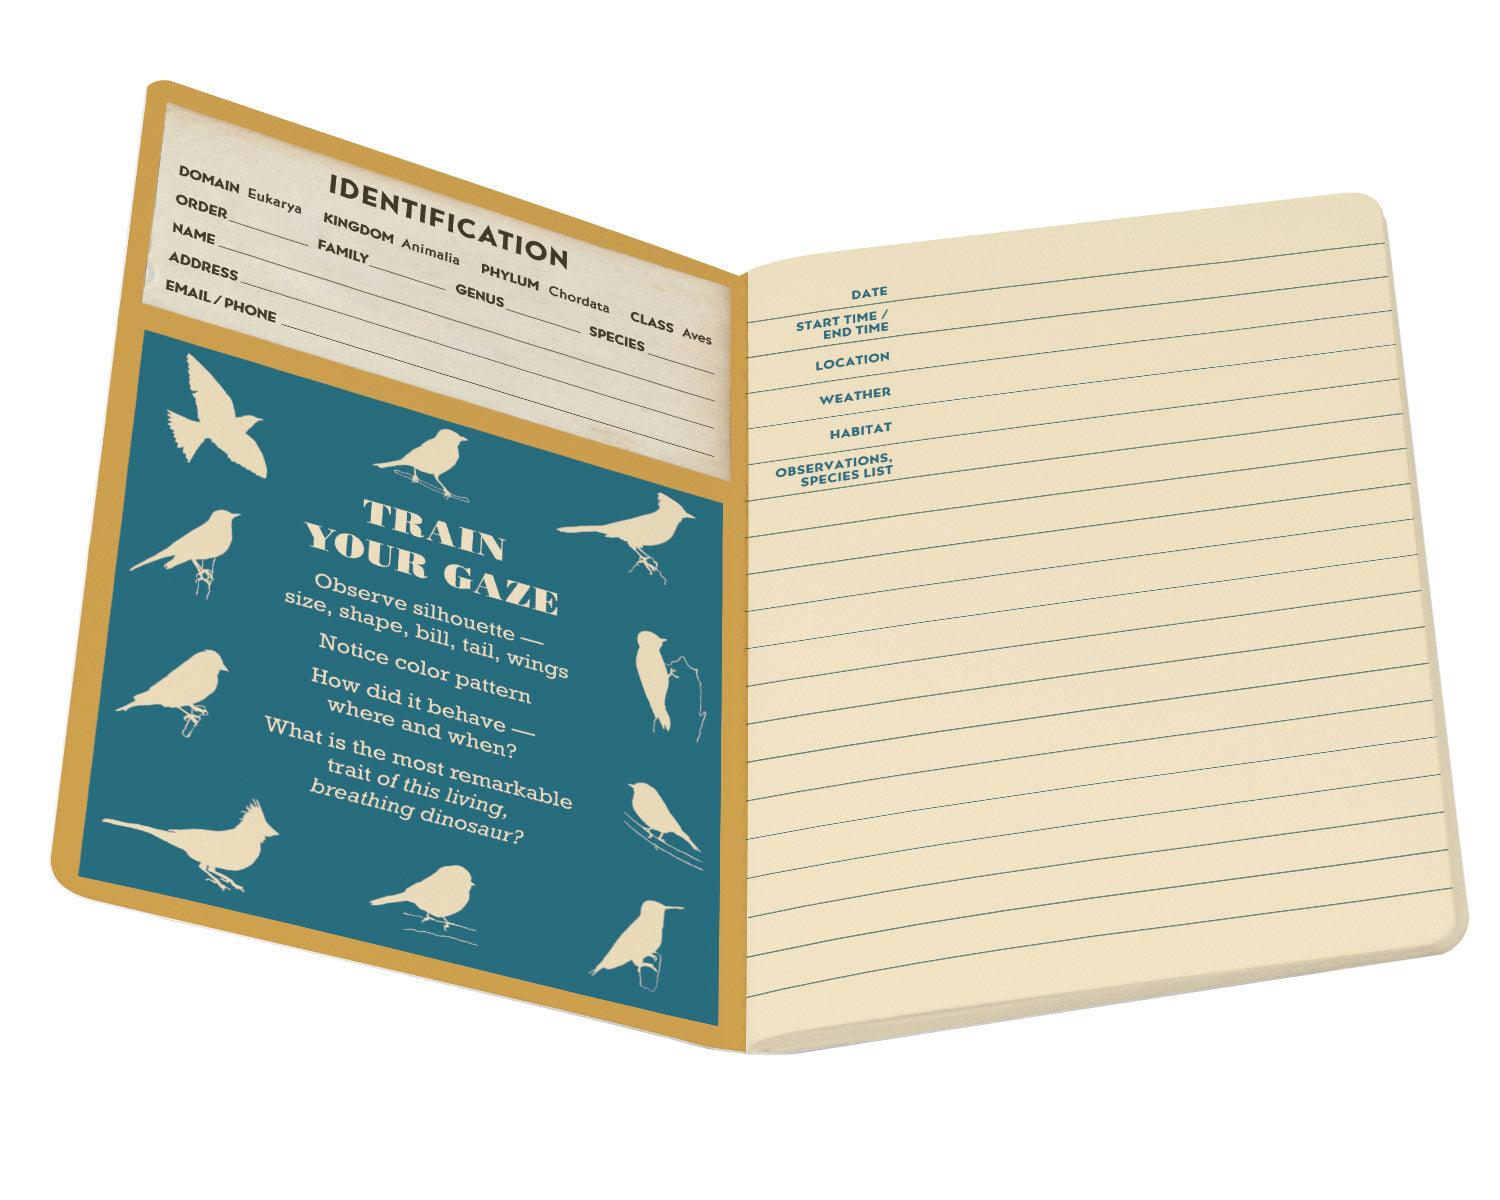 Product photo of Birdwatching Notebook, a novelty gift manufactured by The Unemployed Philosophers Guild.